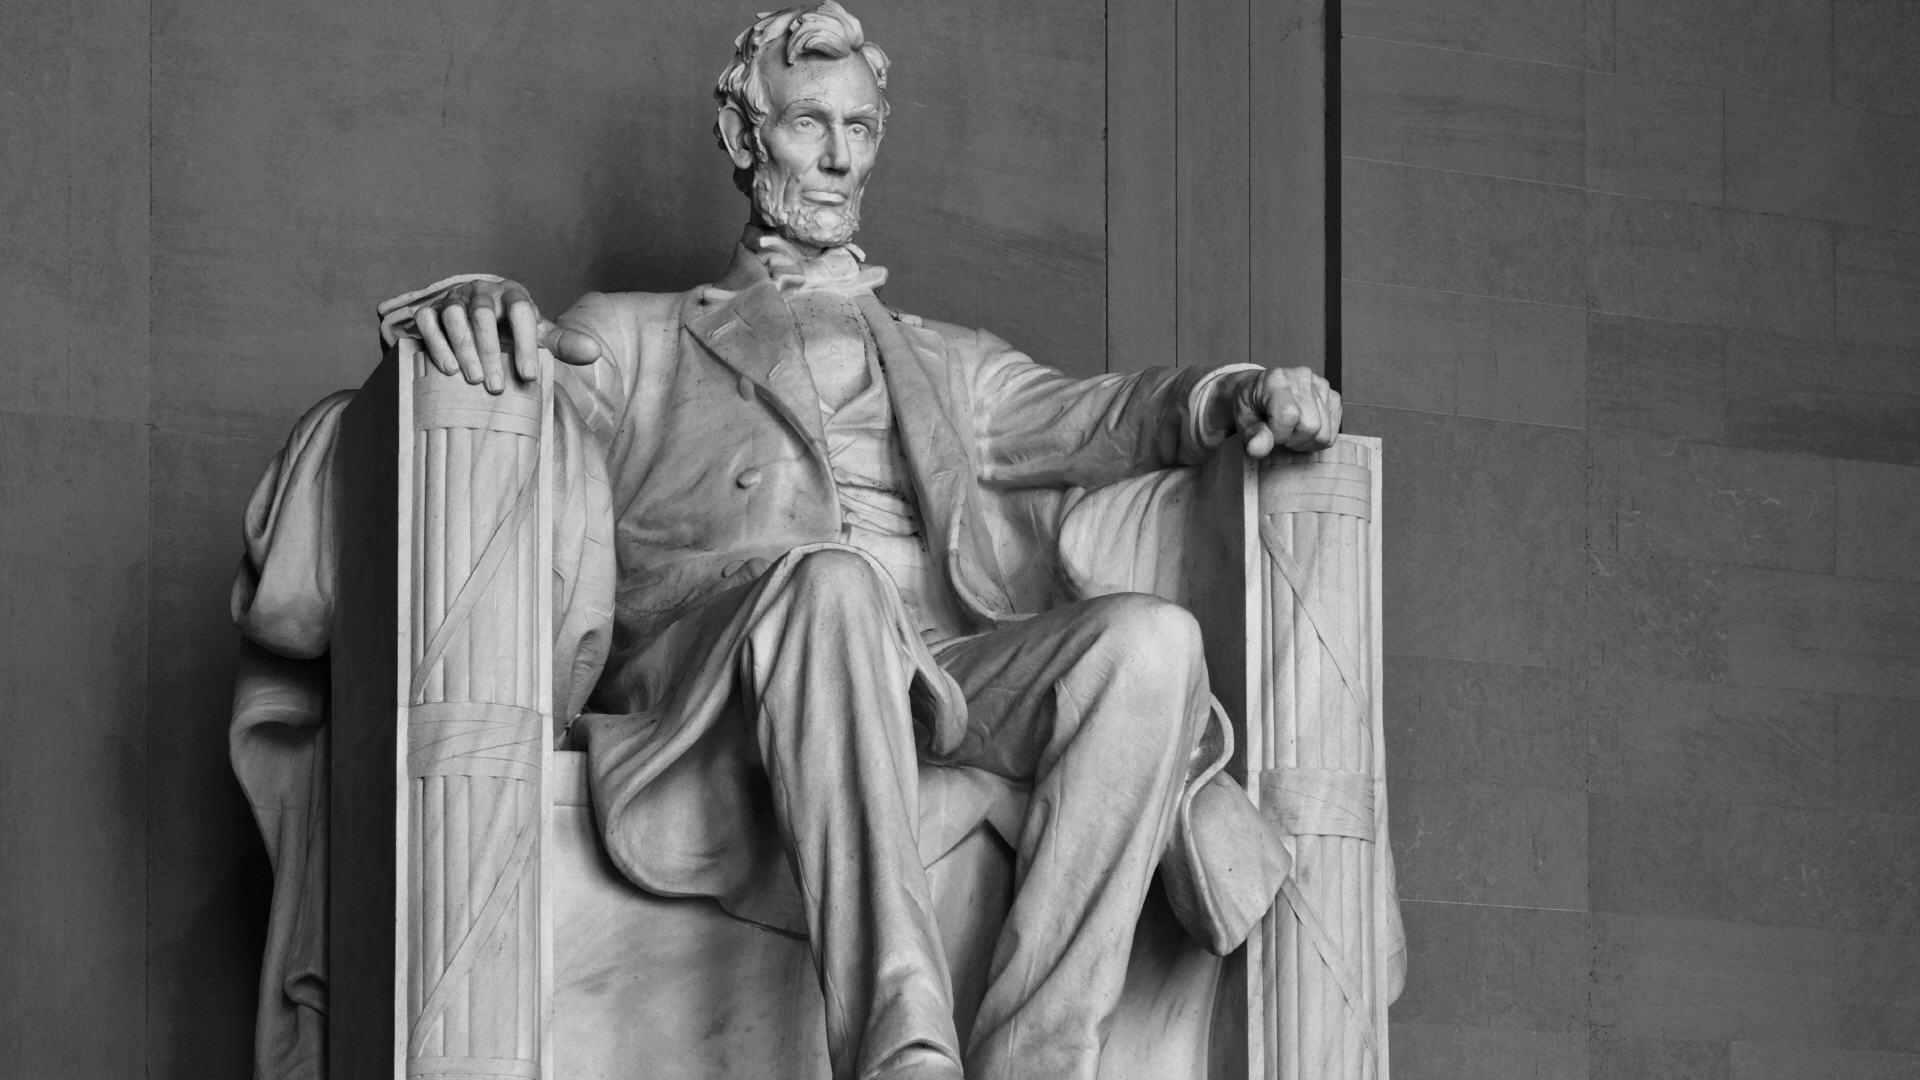 Wallpaper of abraham lincoln Stock Free Image